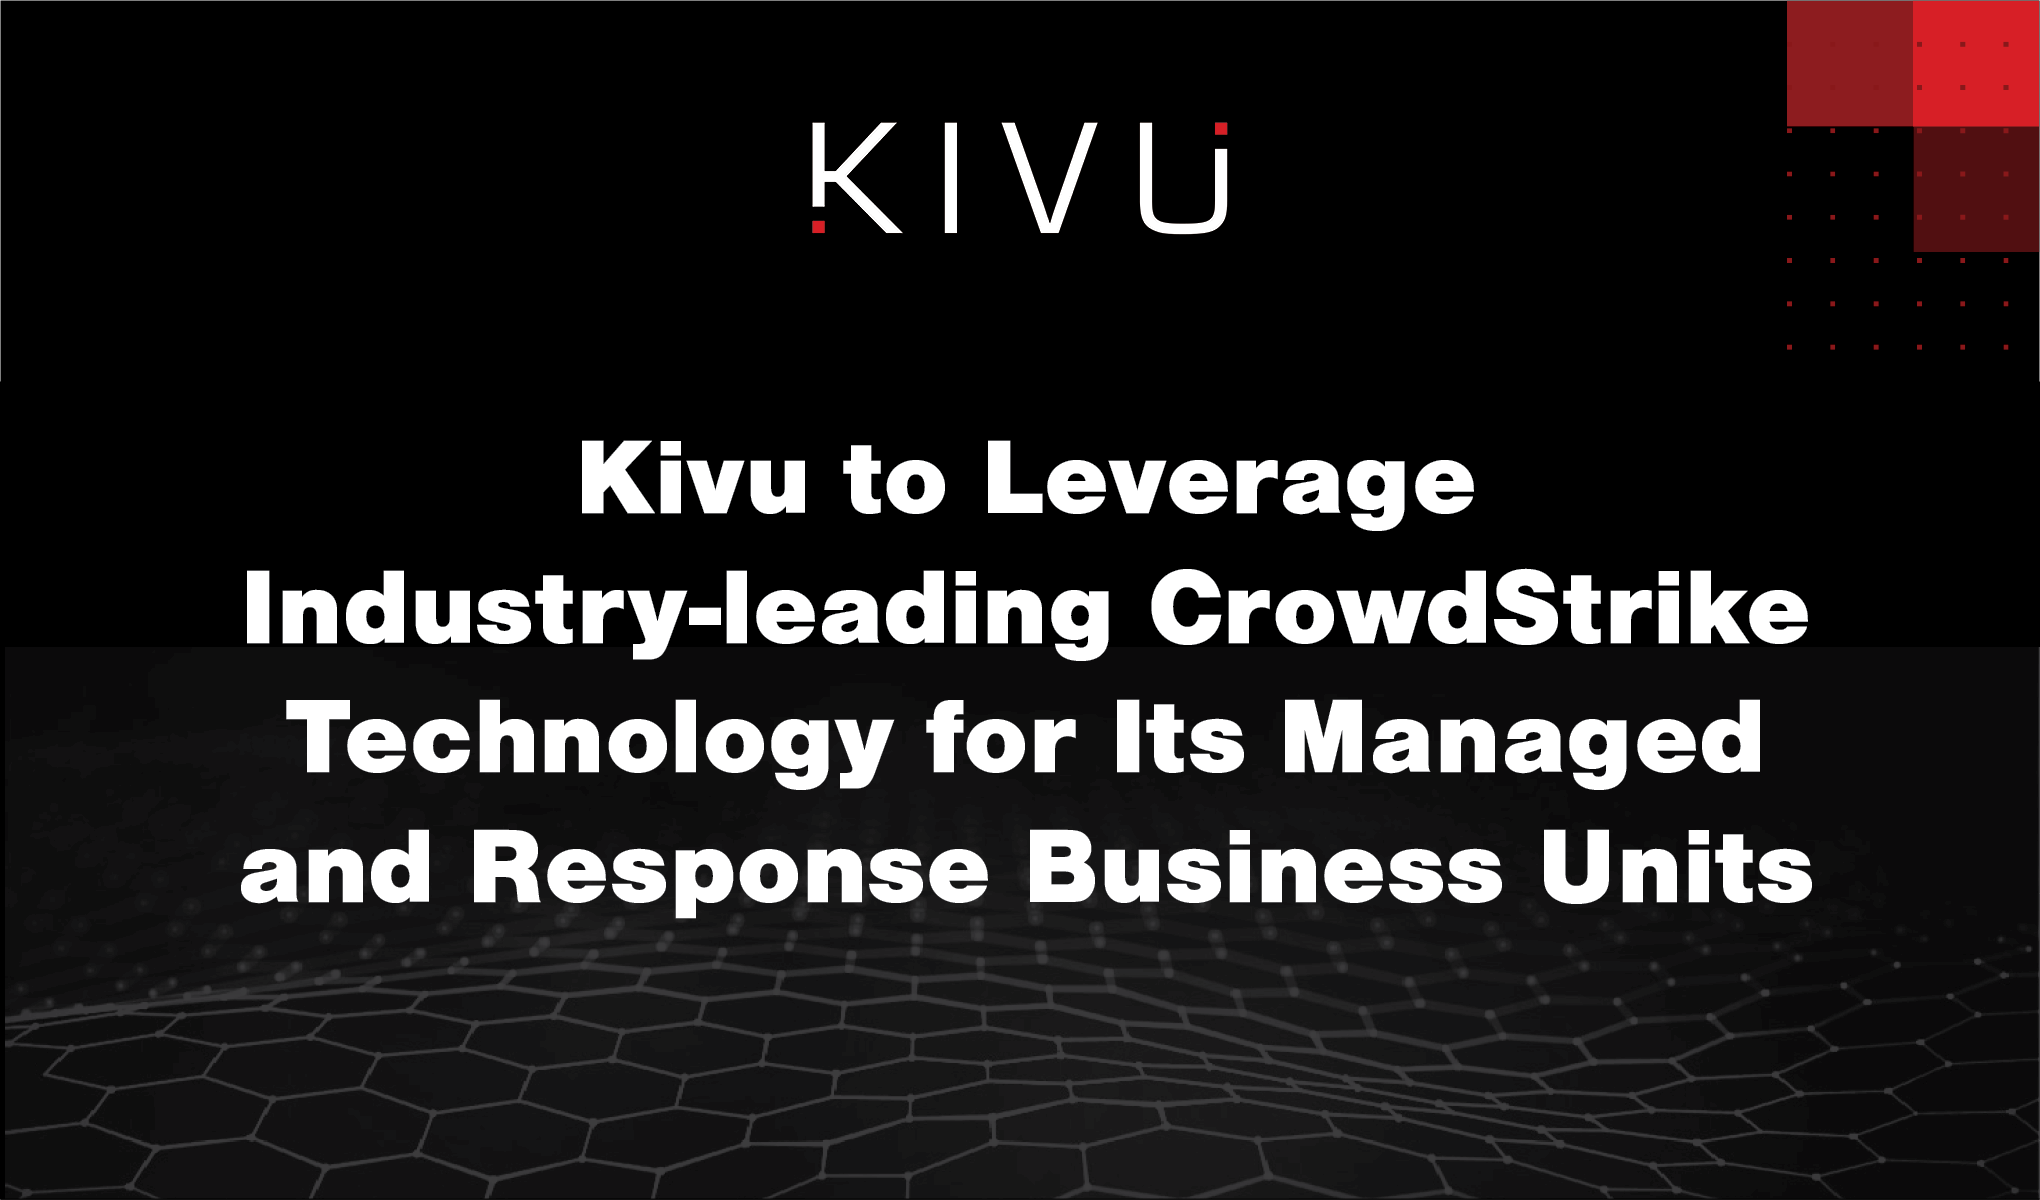 Kivu to Leverage Industry-leading CrowdStrike Technology for Its Managed and Response Business Units